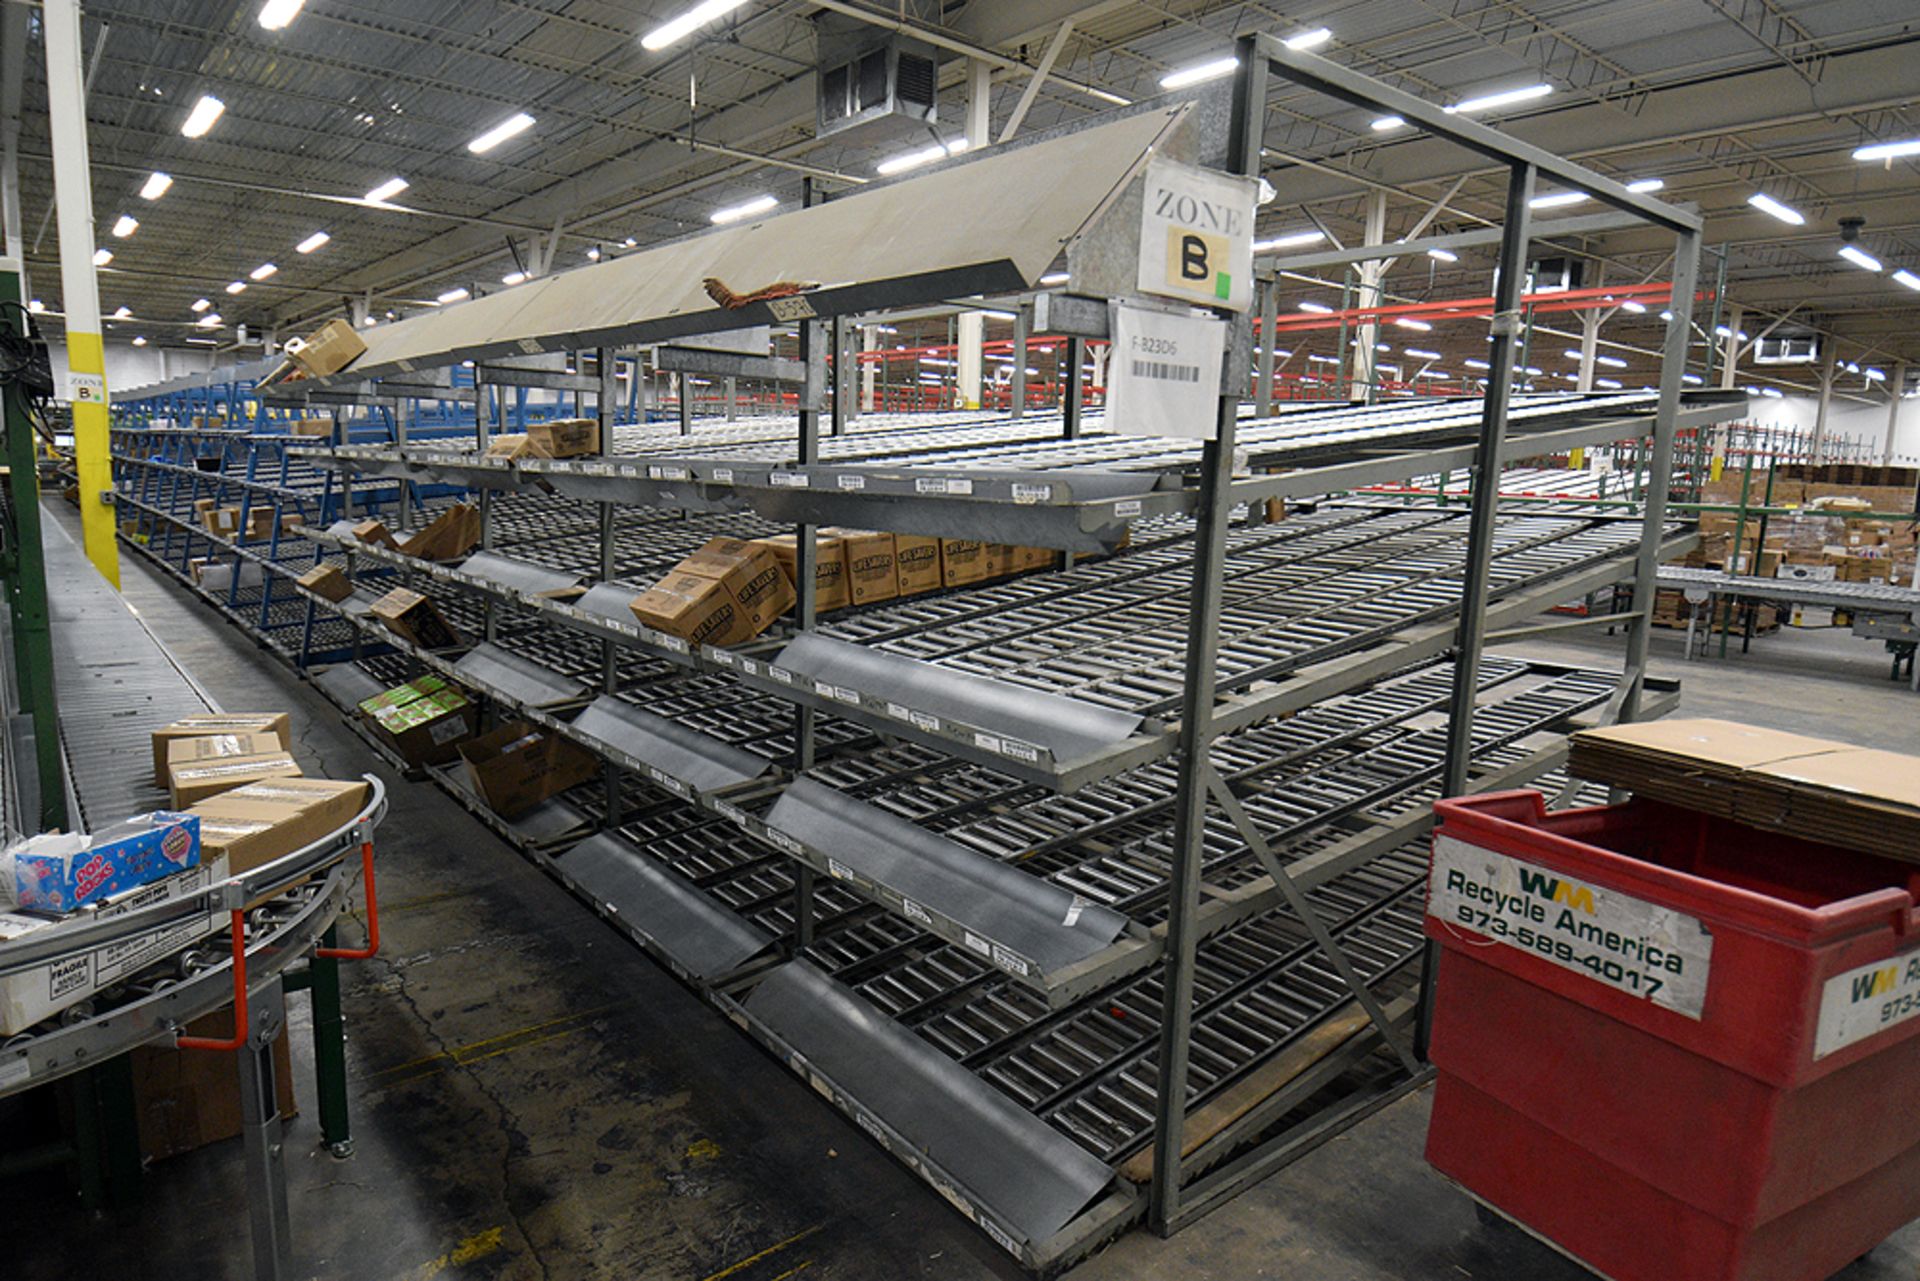 4-Tier Gravity Fed, Carton Flow Rack (132"x300"x95"H) (108"x7" Rollers) - Image 4 of 4